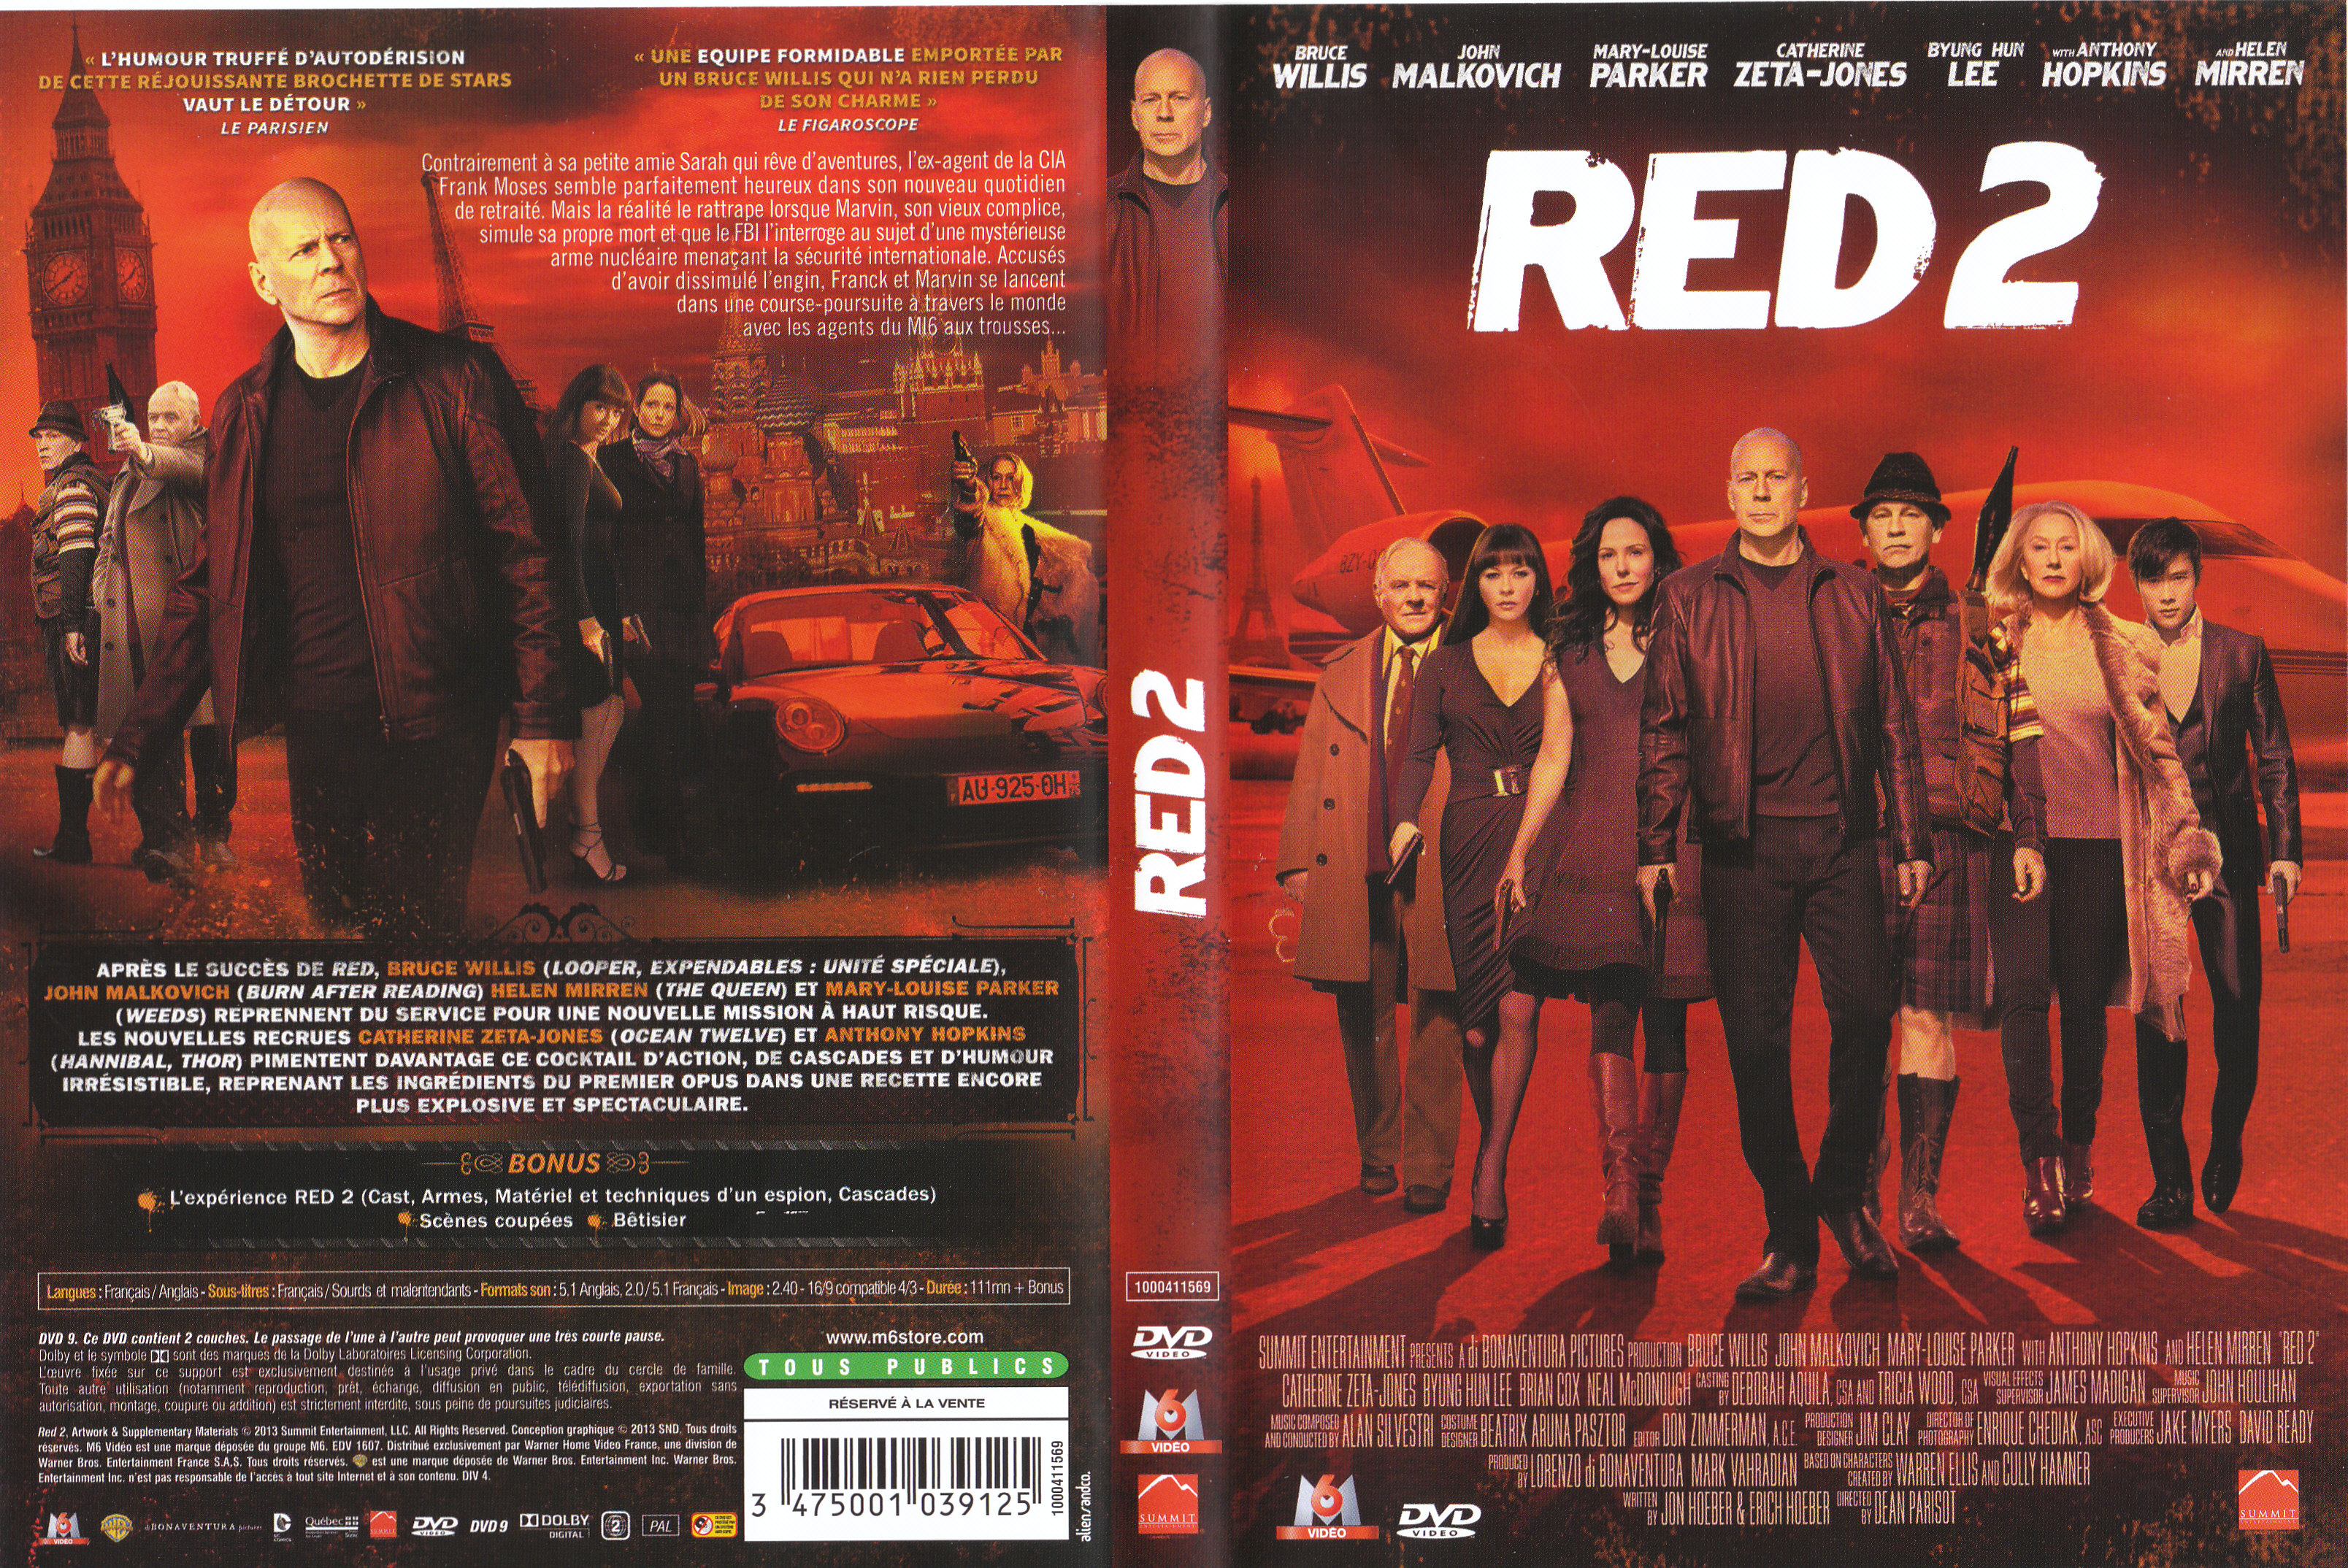 Jaquette DVD Red 2